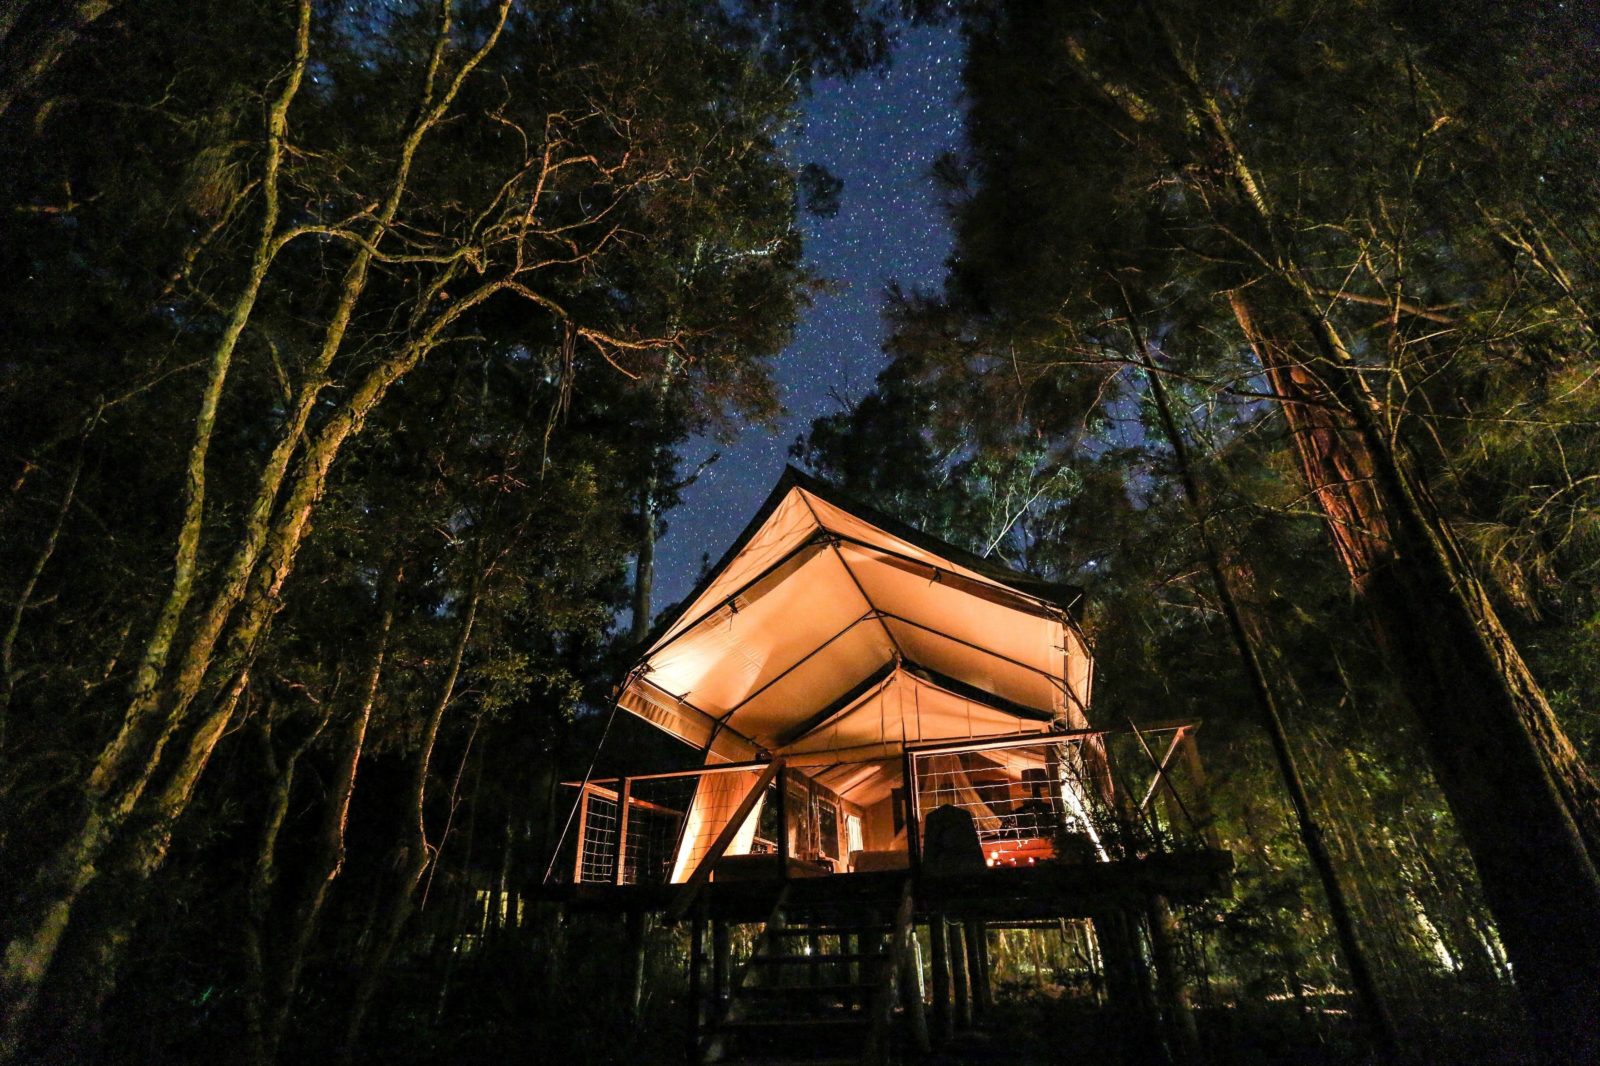 Luxury safari tent accommodation at Paperbark Camp in Jervis Bay